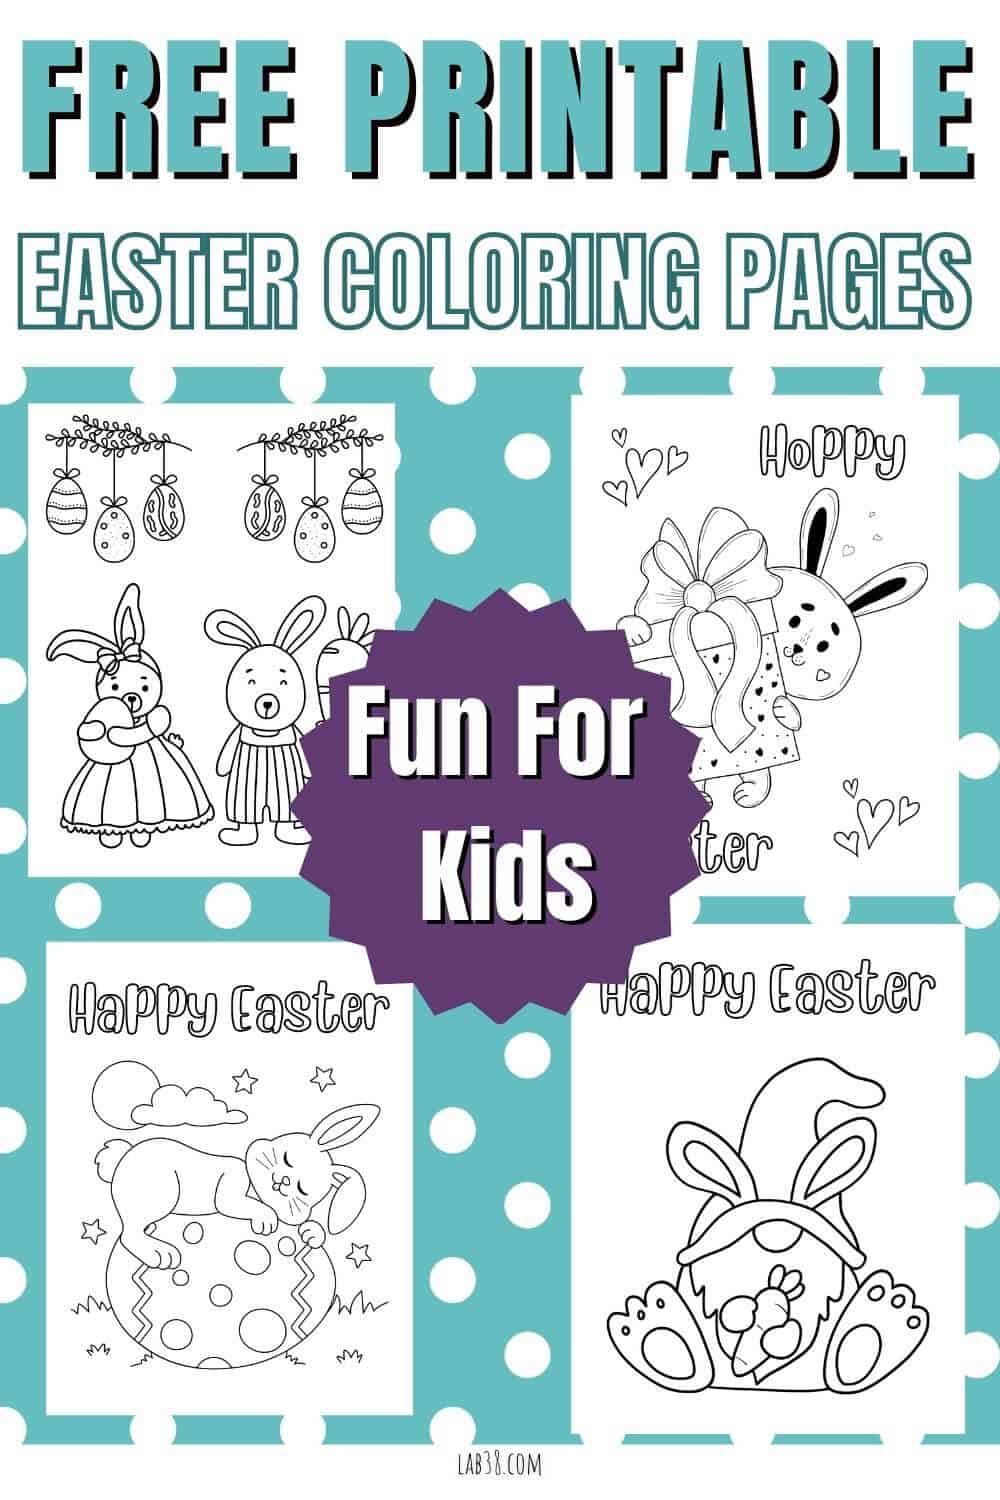 Free Printable Easter Coloring Pages for Kids